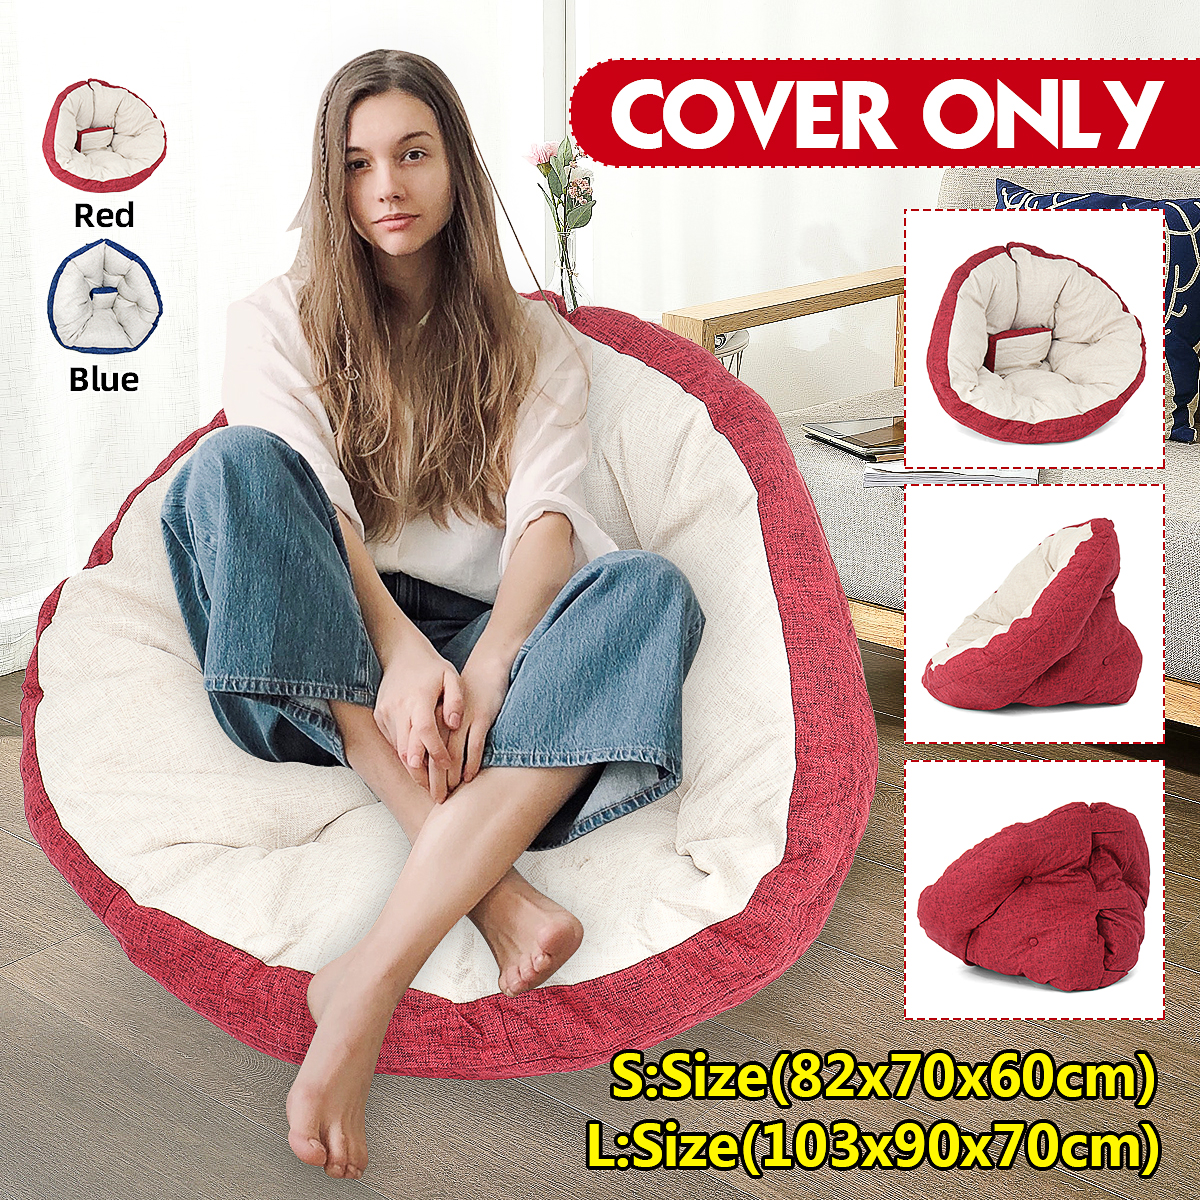 Lazy Lounge Sofa Large Bean Bag Cover Adult Kids Chair Home Indoor S/L Size 64